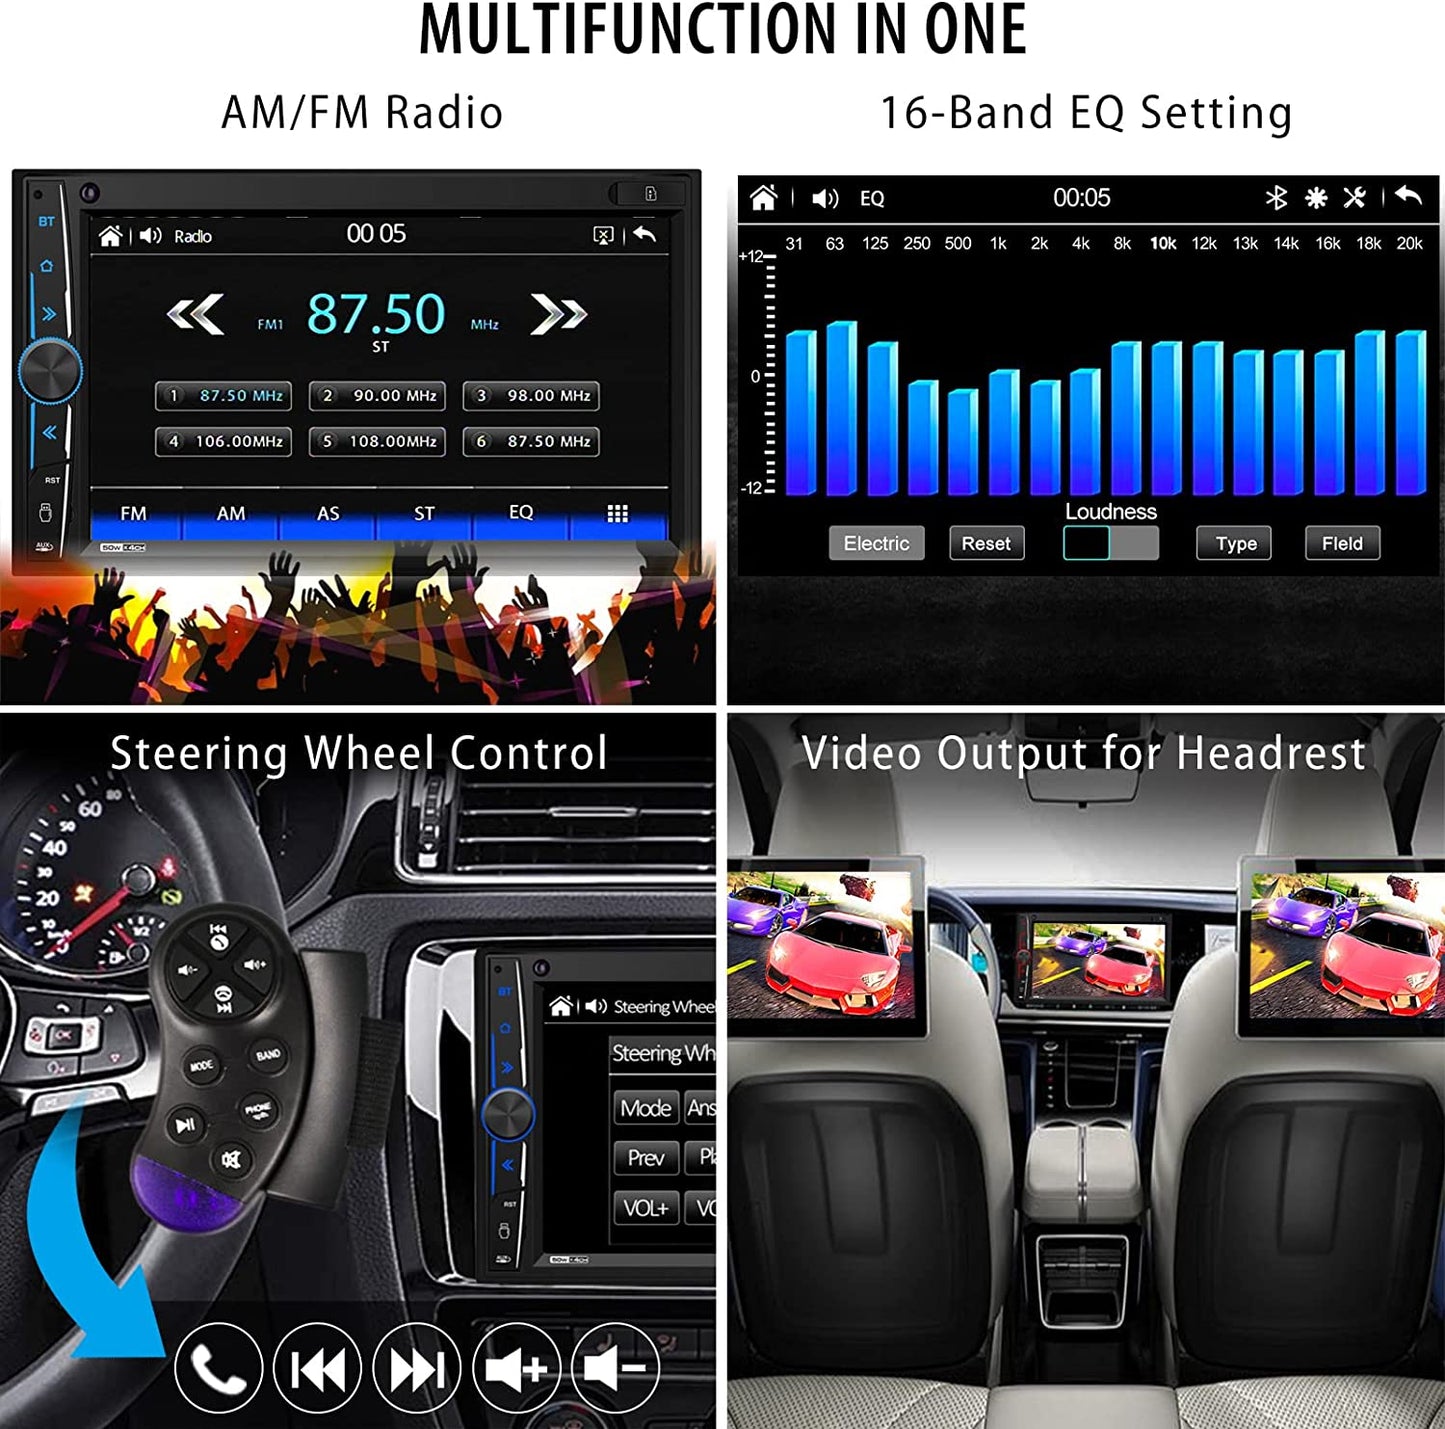 Carplay Android Auto: Double Din Car Radio 7 Inch HD Capacitive Touchscreen – Bluetooth Car Audio Receiver – LCD Display | Mirrorlink | Backup Camera | USB SD A/V Input | AM FM Radio